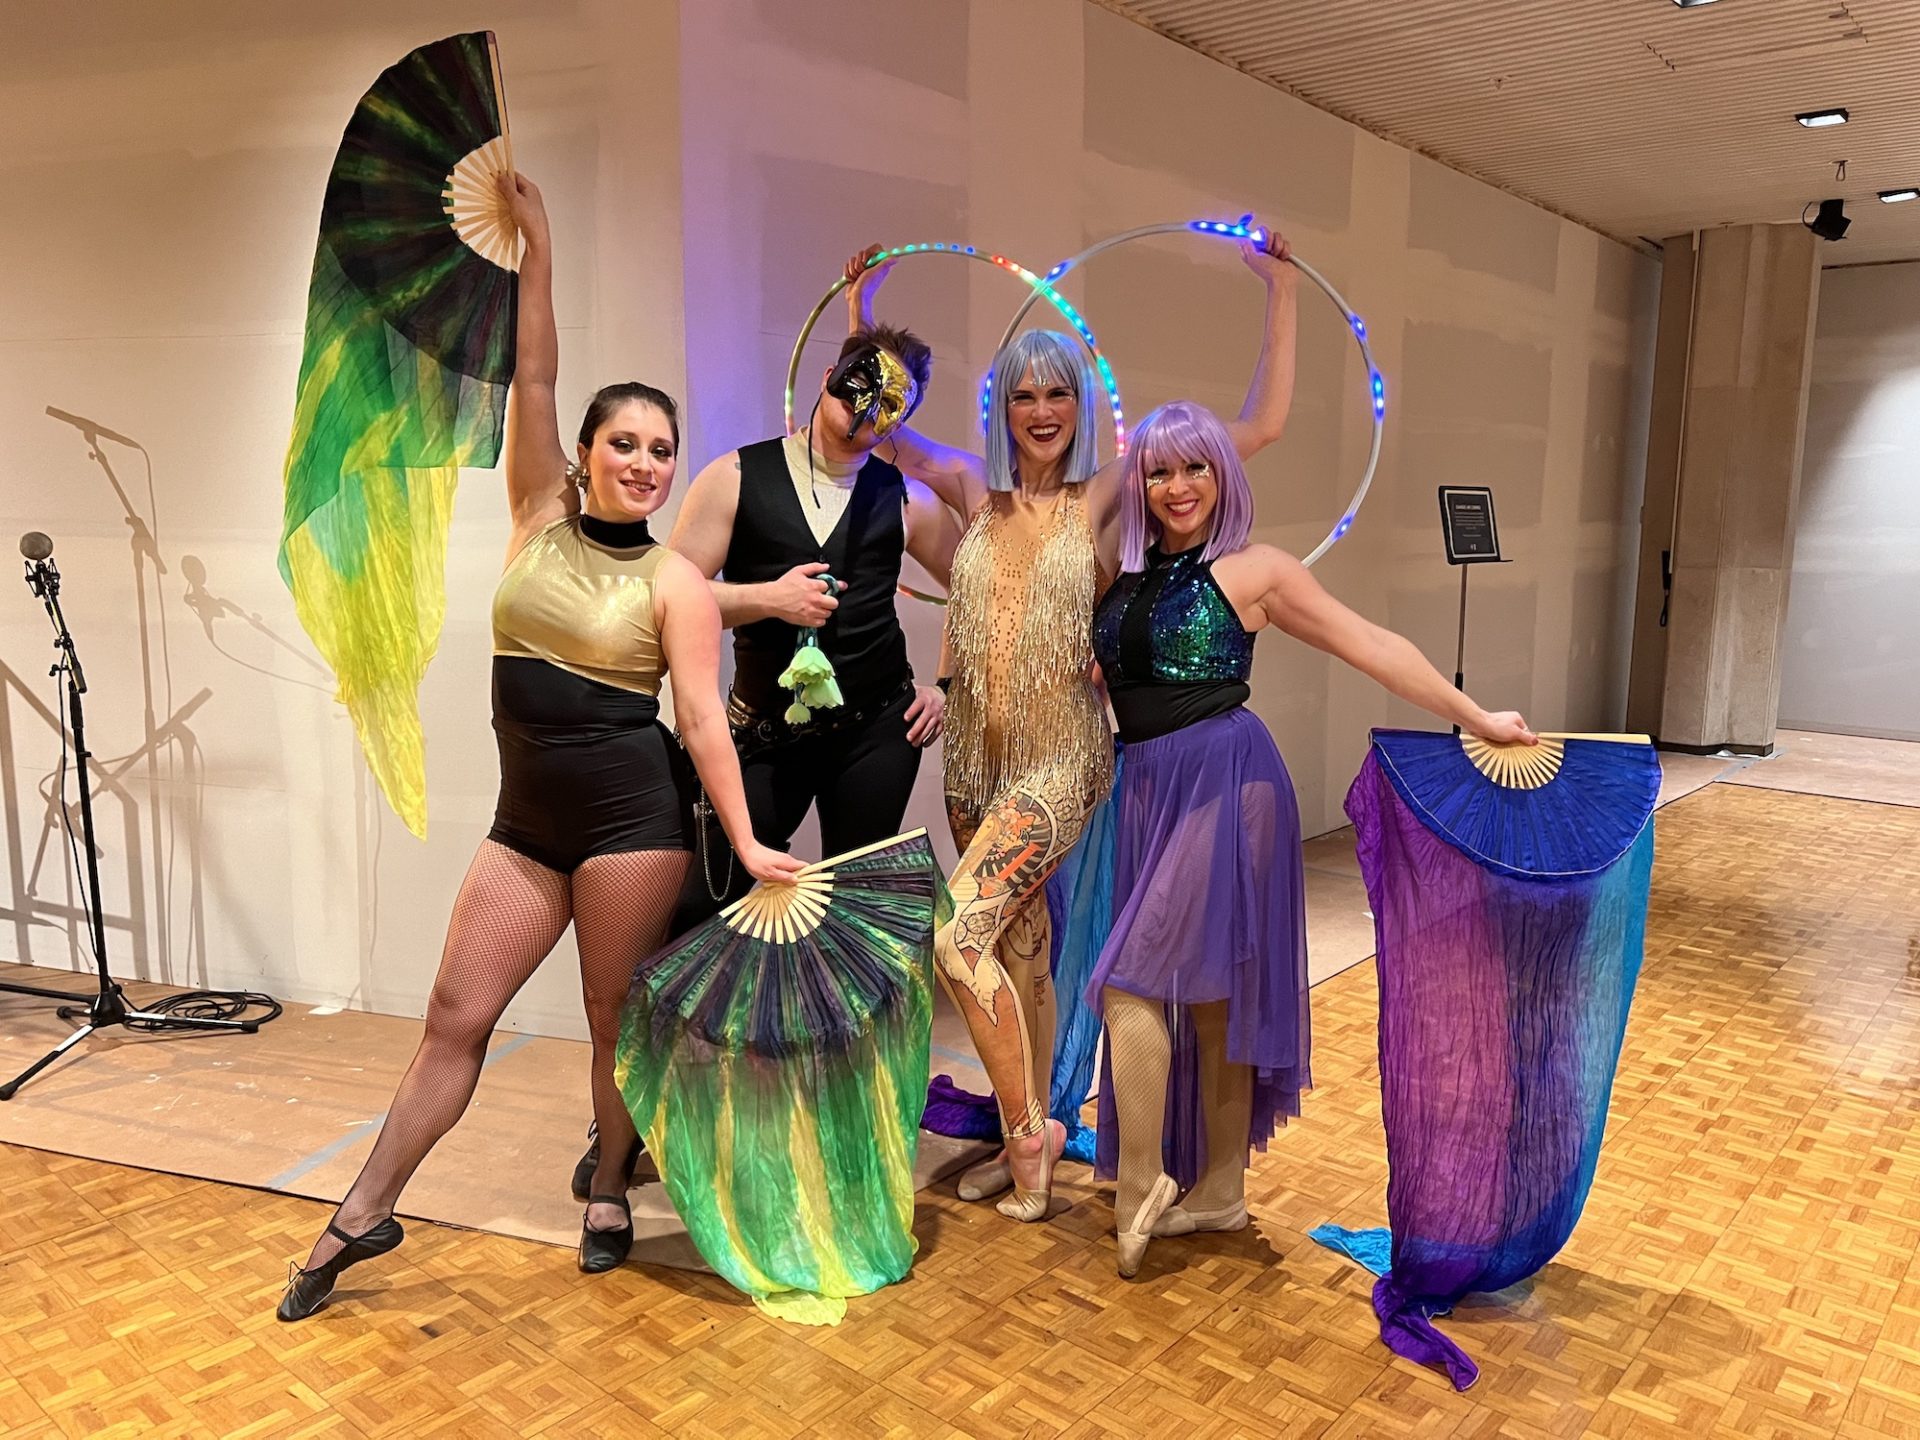 Four performers from Carnaval. Three woman and one man in acrobatics outfits. Two women have fans with fabric and one woman hold two hula hoops above her head.